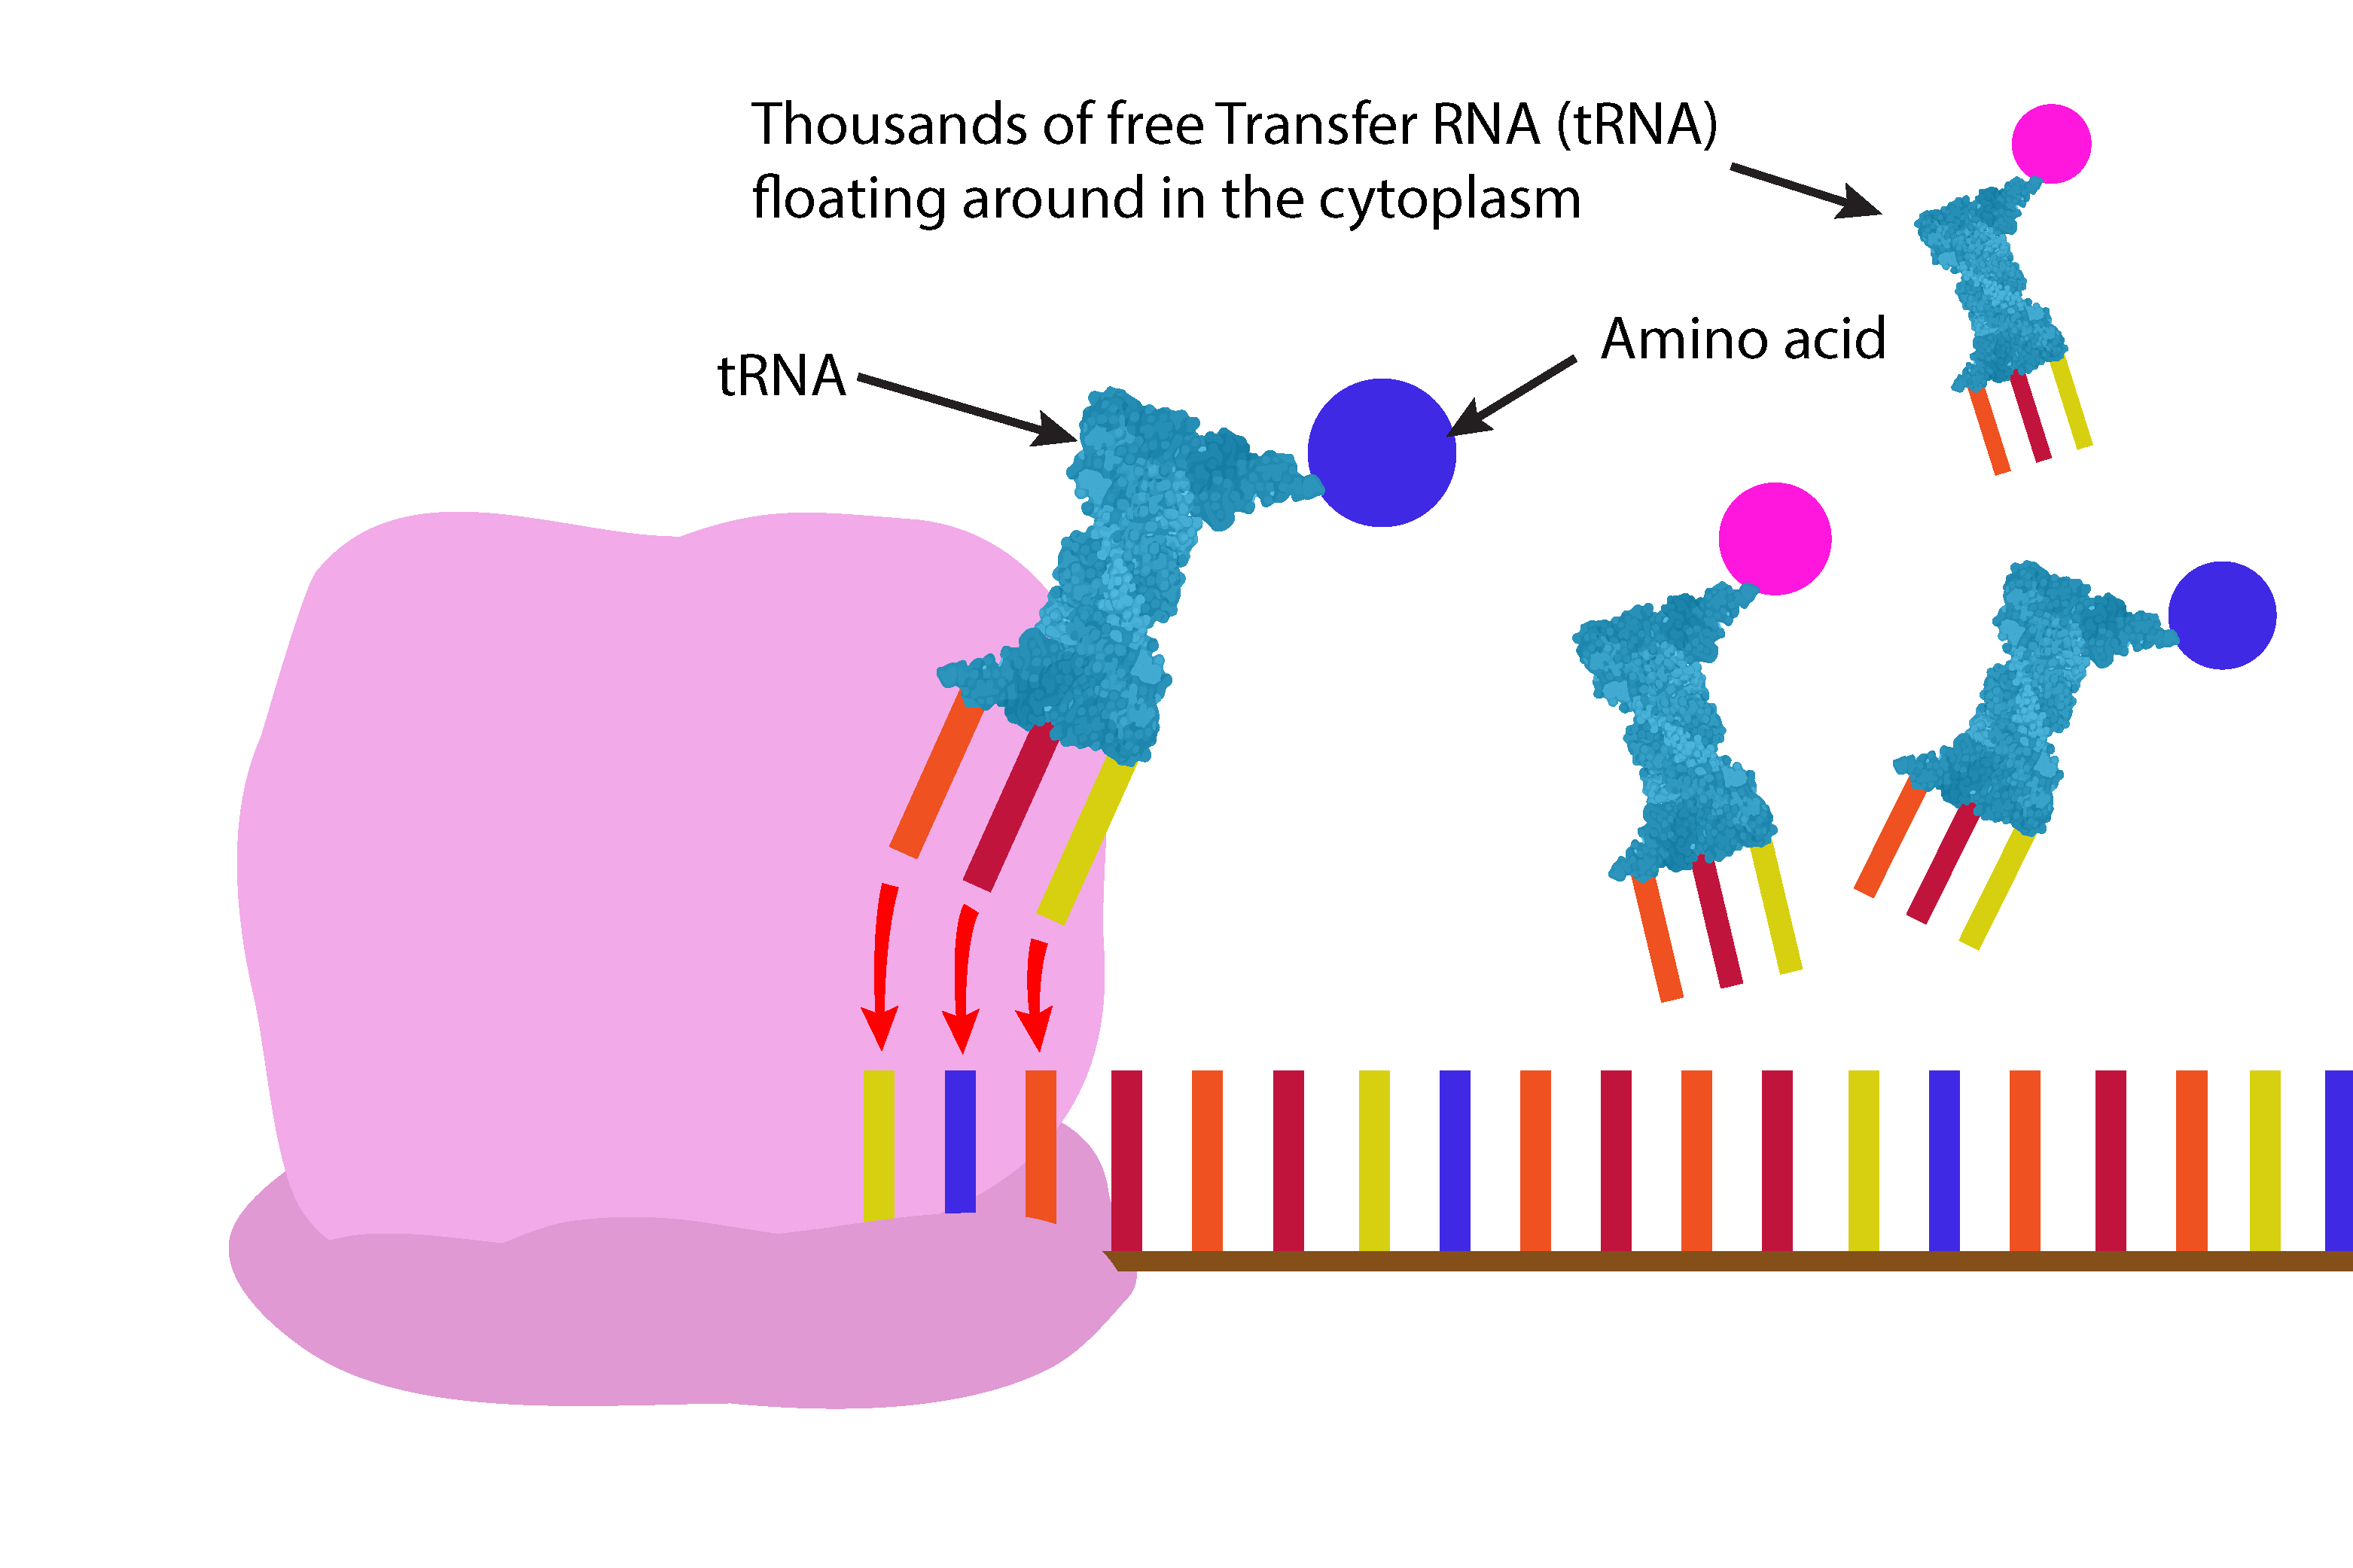 The ribosome reads the mRNA 3 bases at a time and attaches free floating tRNA to the 3 bases 